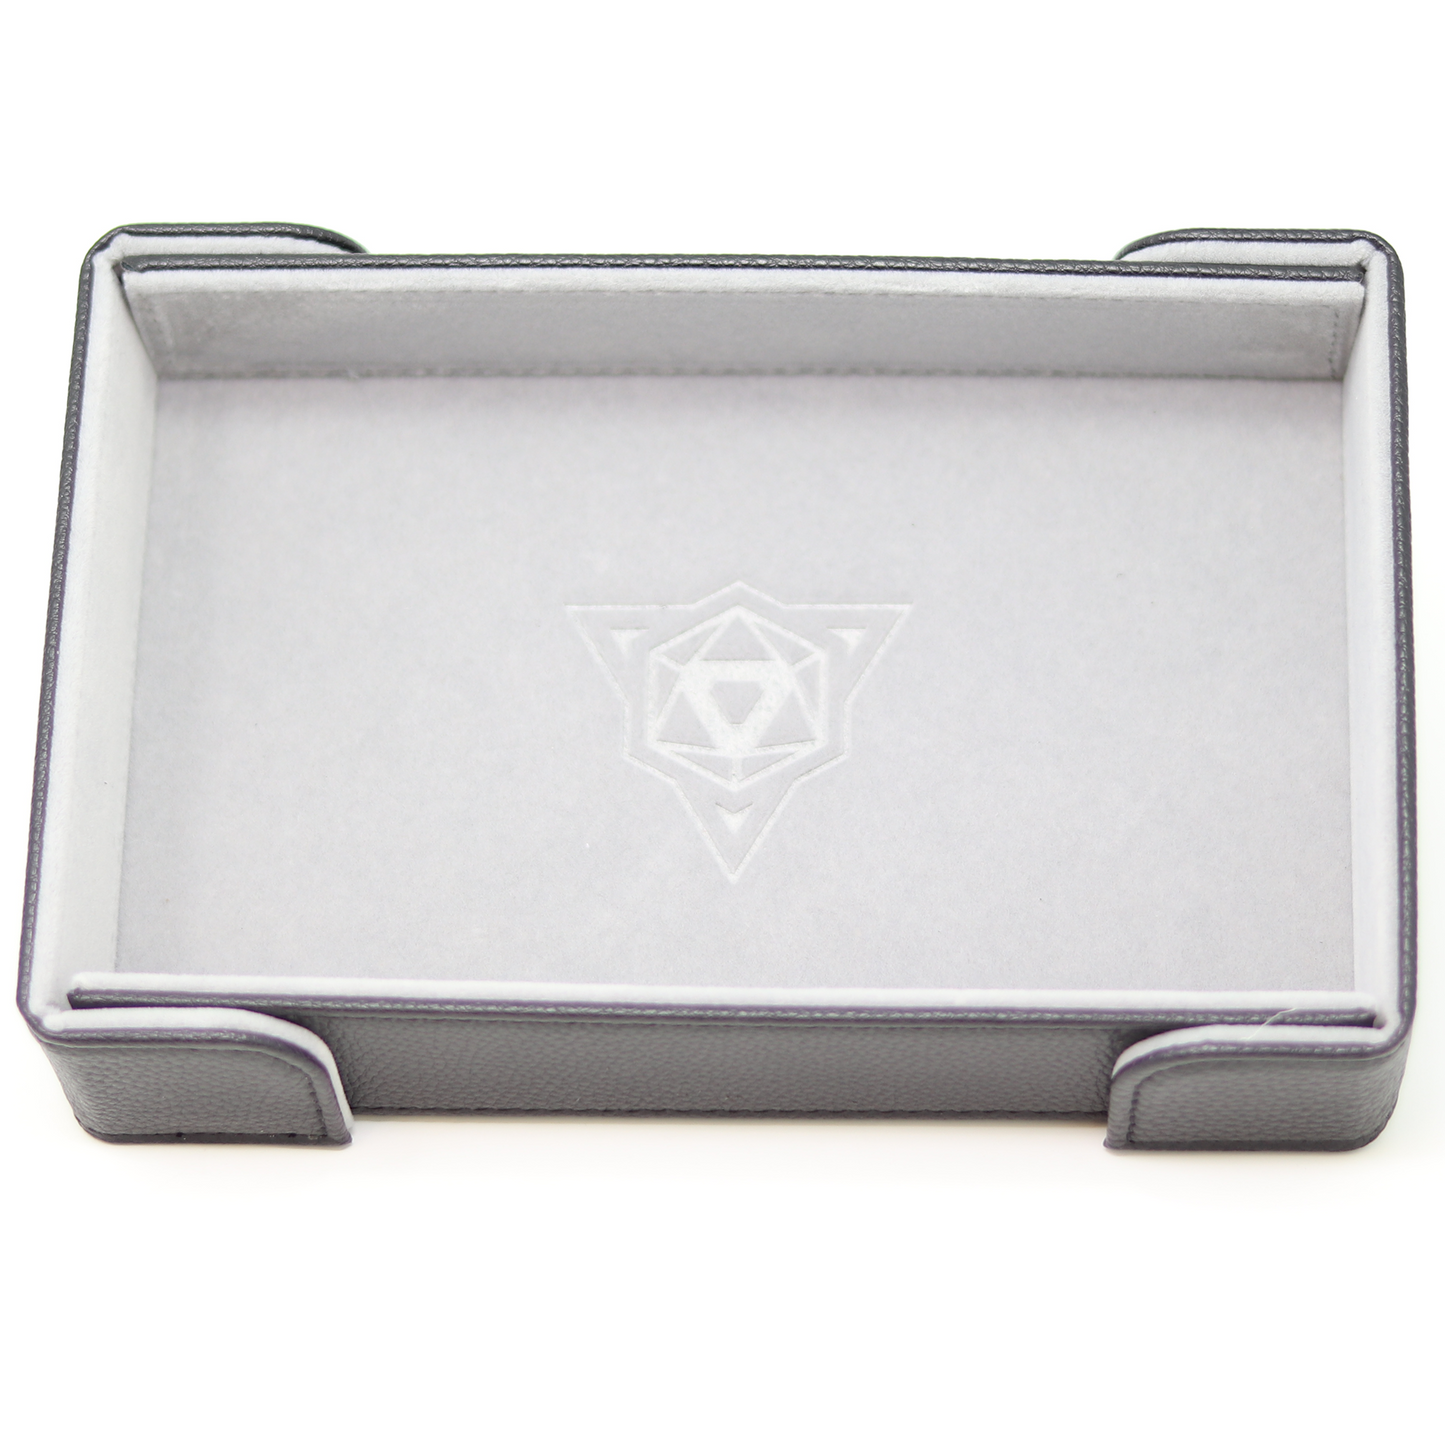 Die Hard Magnetic Rectangle Tray